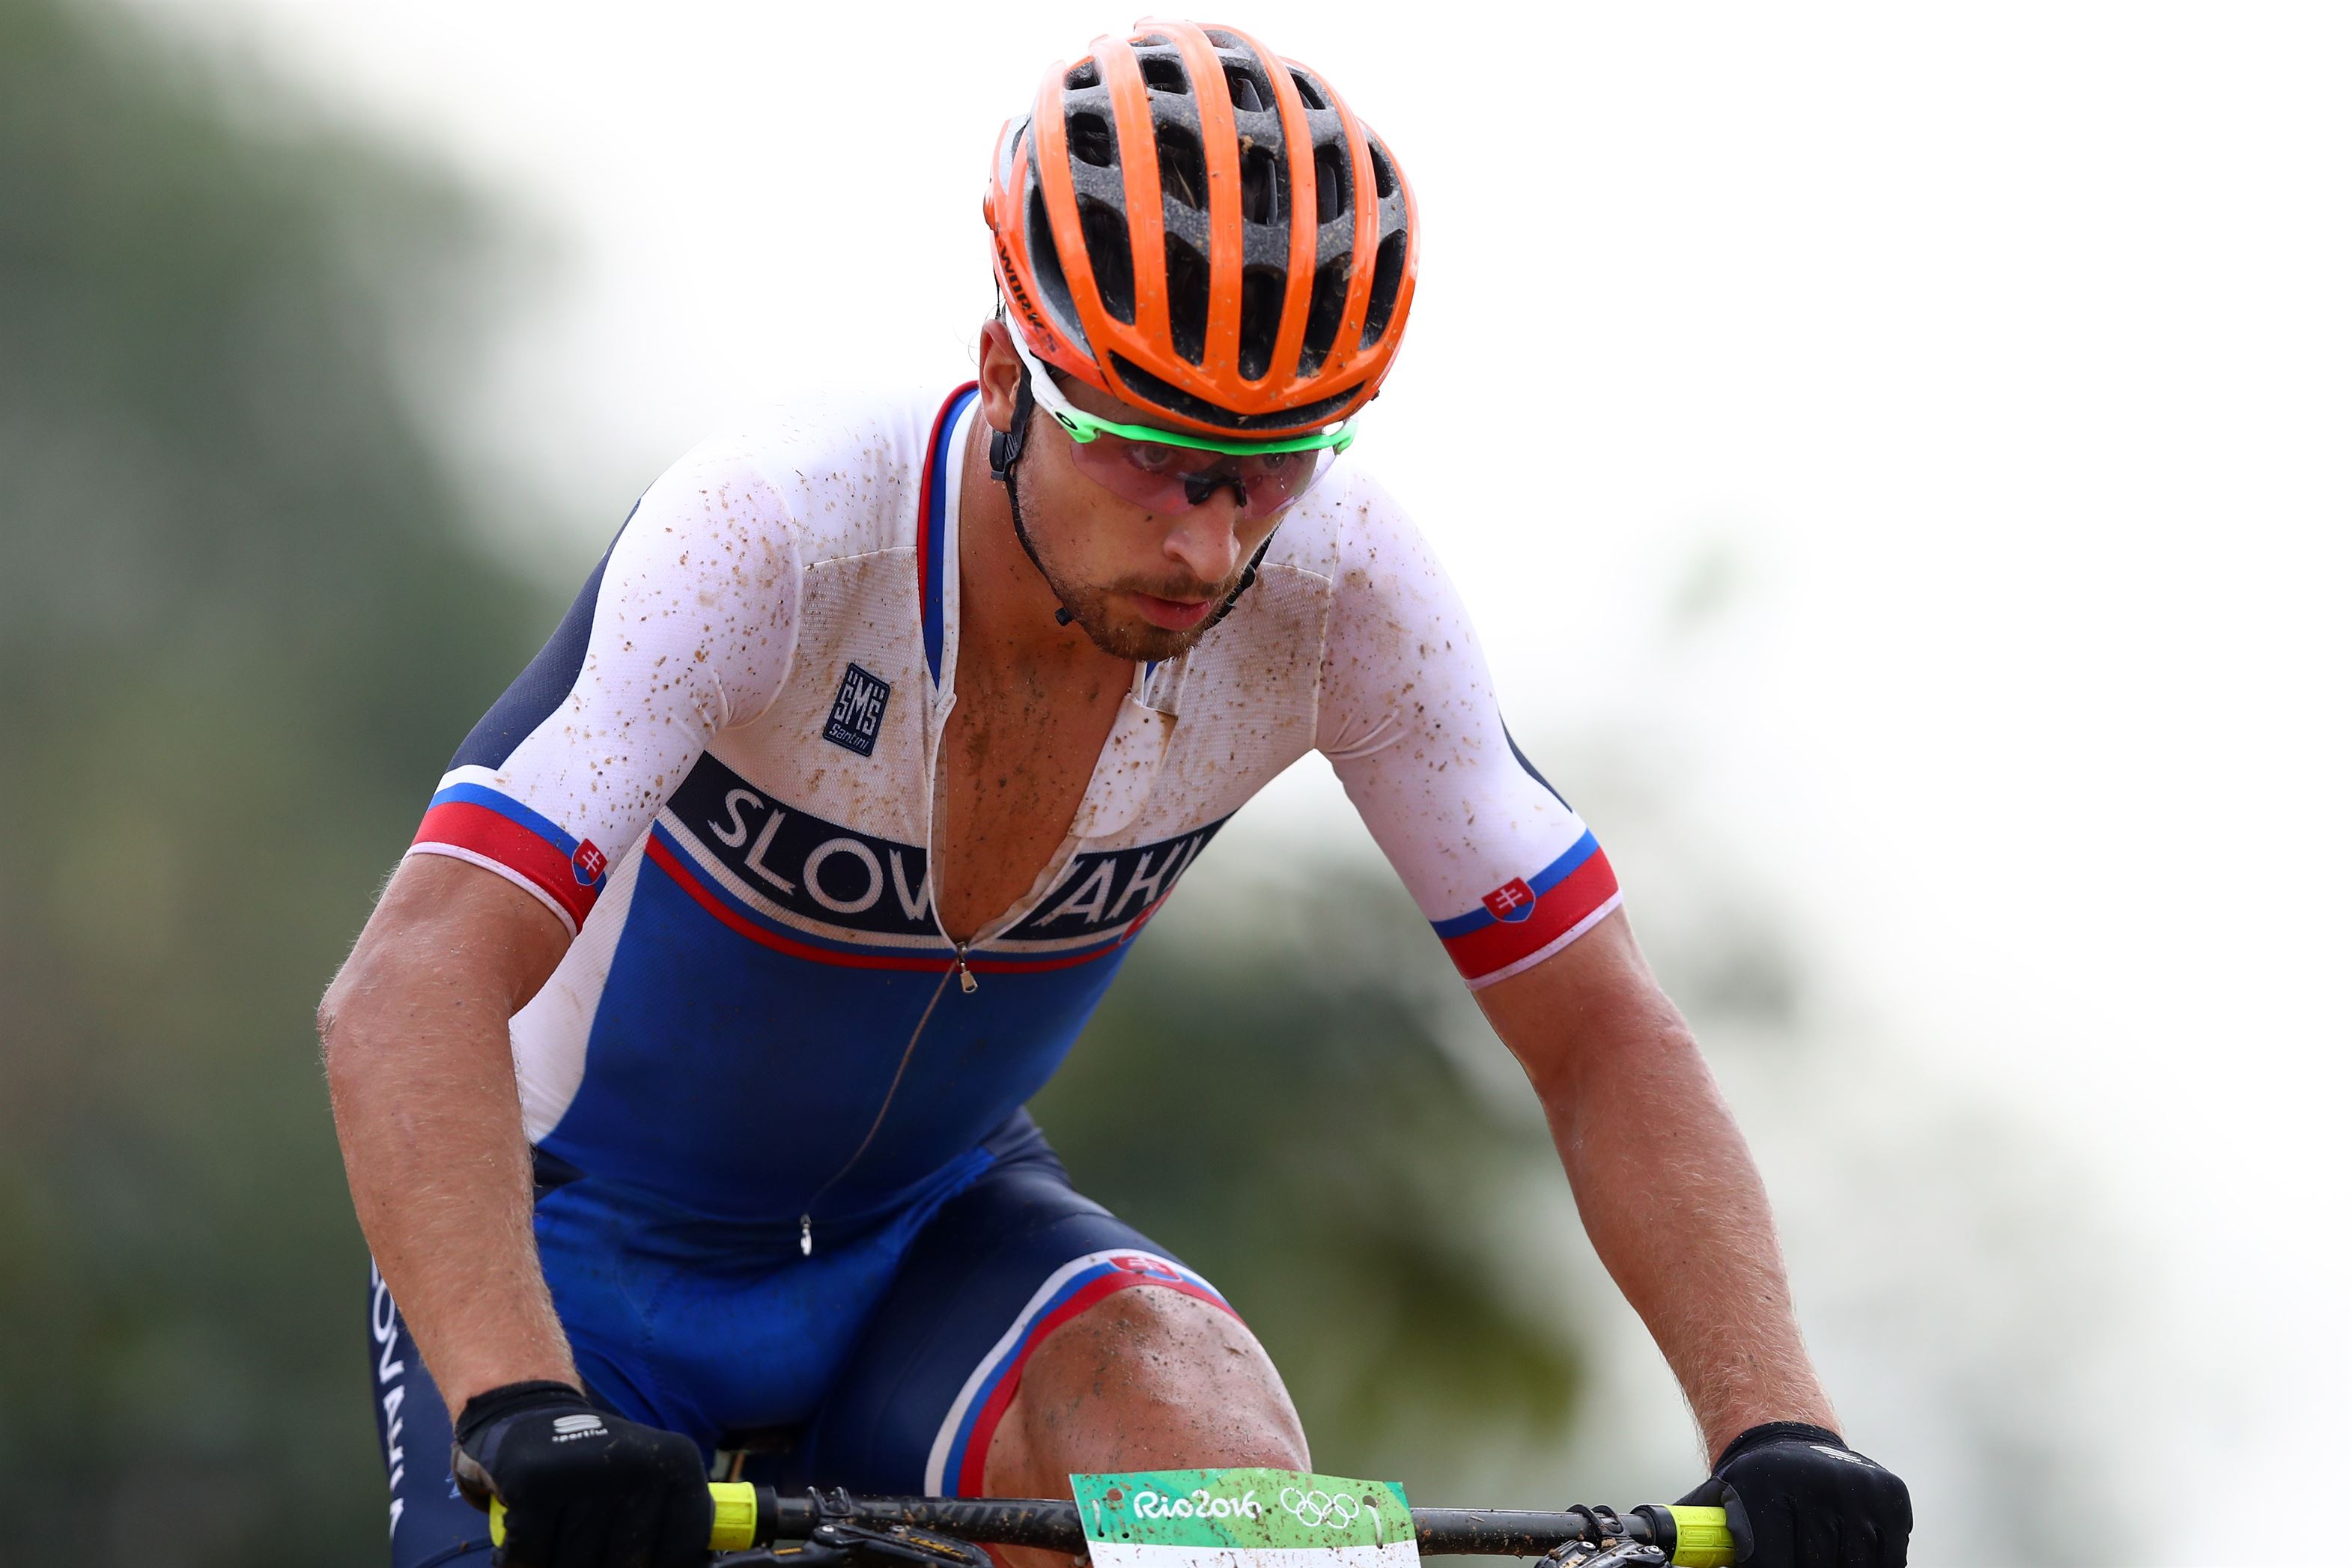 Eyeing the Olympic mountain bike race in Paris, Peter Sagan will retire from WorldTour racing at season's end